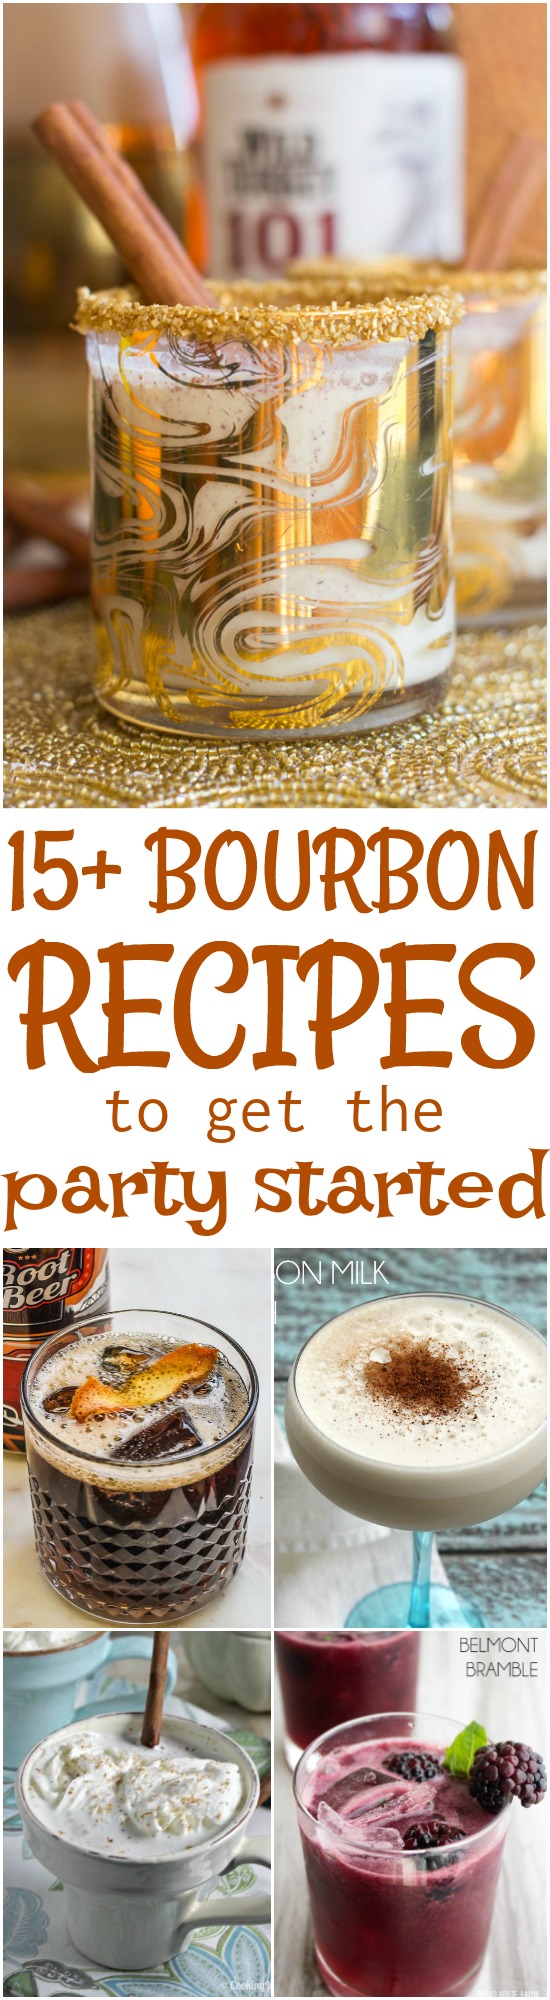 Bourbon definitely has a time and place and with a little experimentation will become one of your go-to cocktails. I collected 15+ Bourbon Cocktail Recipes to get the Party Started for you to try.